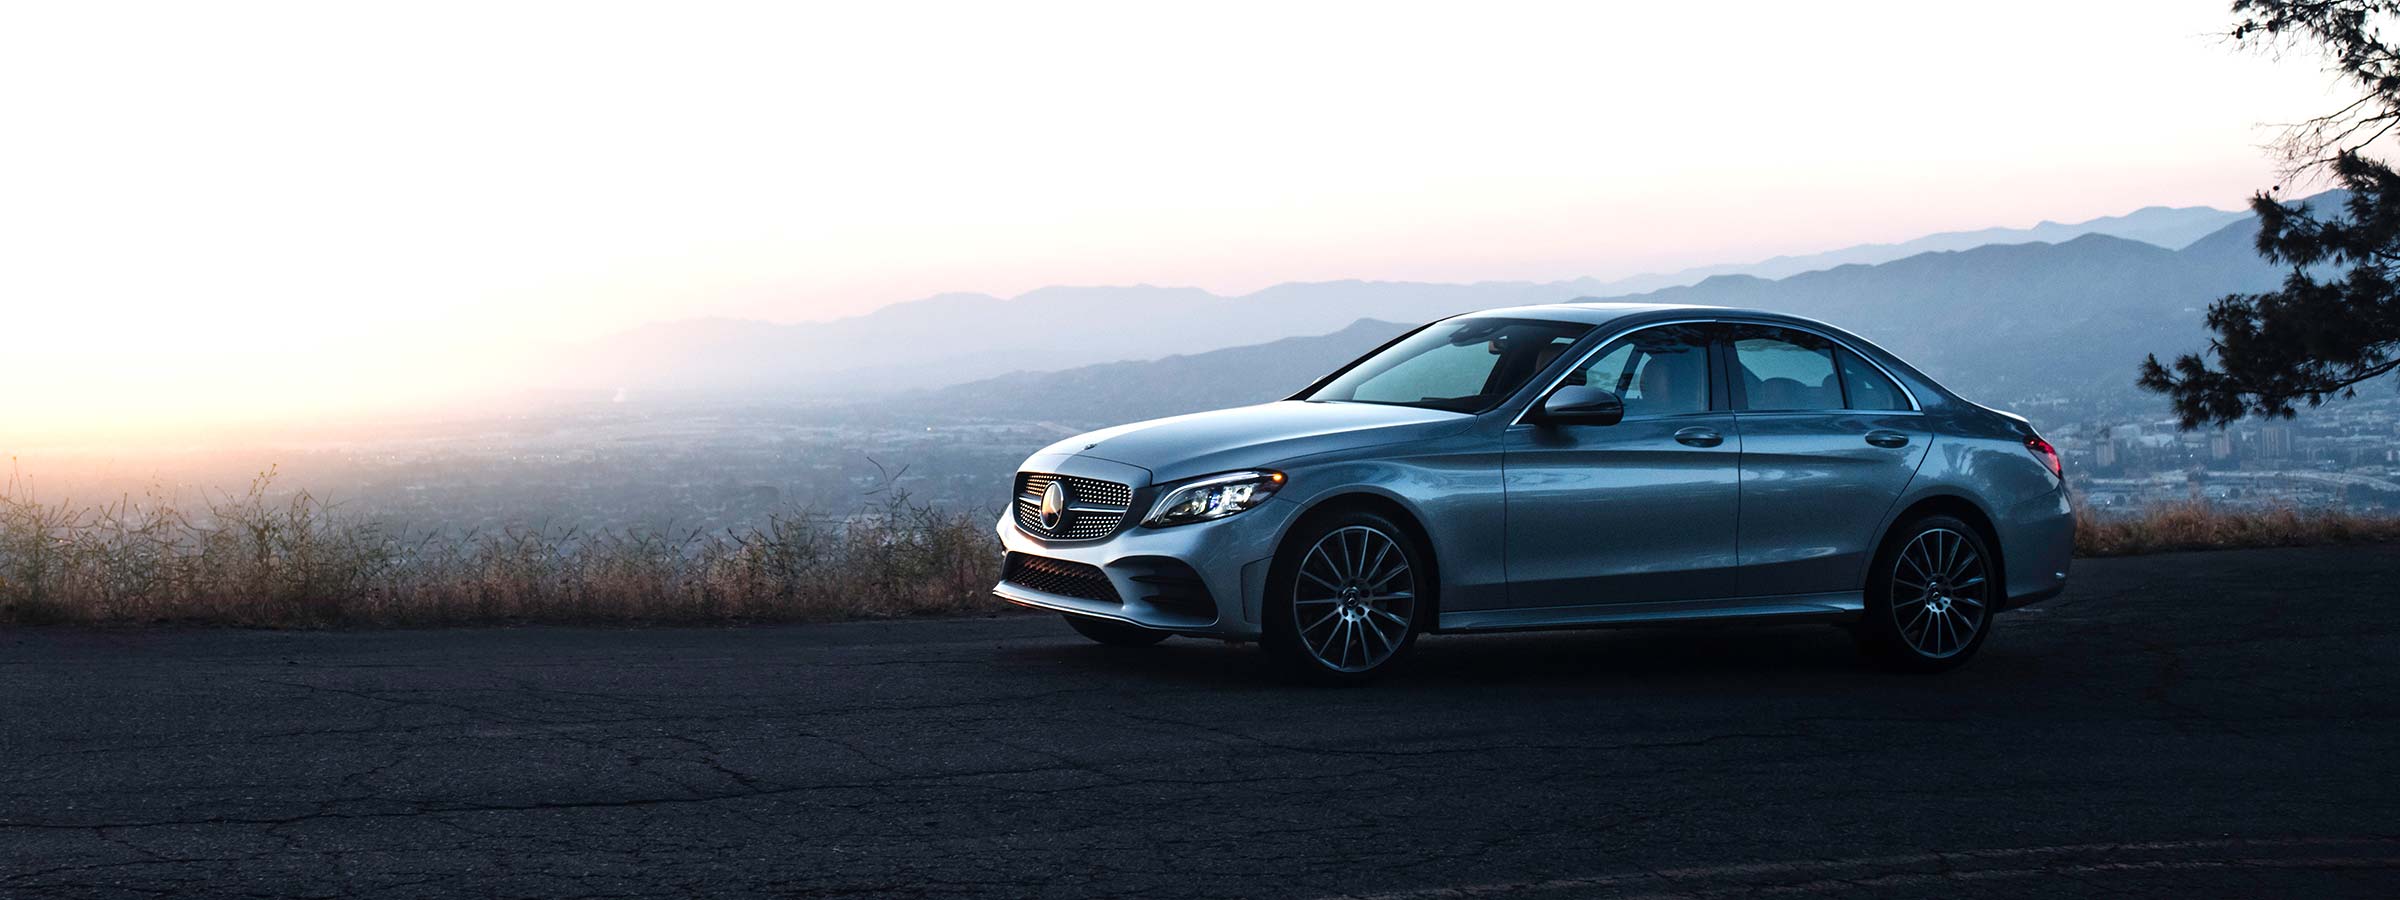 Great selection of Mercedes-Benz vehicles under $25K